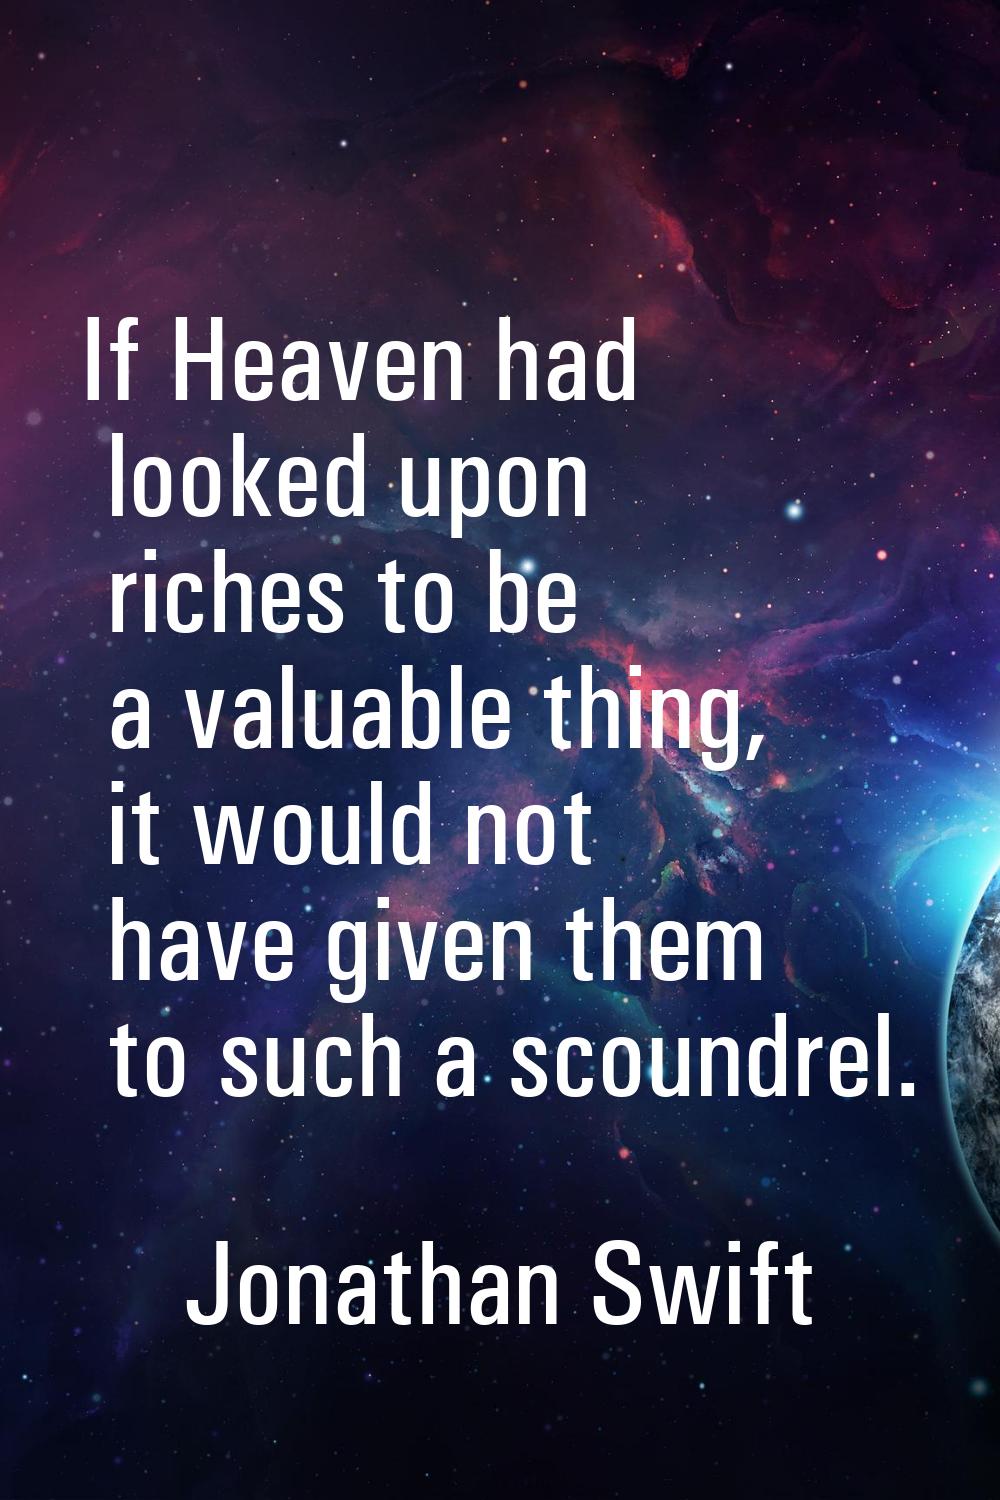 If Heaven had looked upon riches to be a valuable thing, it would not have given them to such a sco